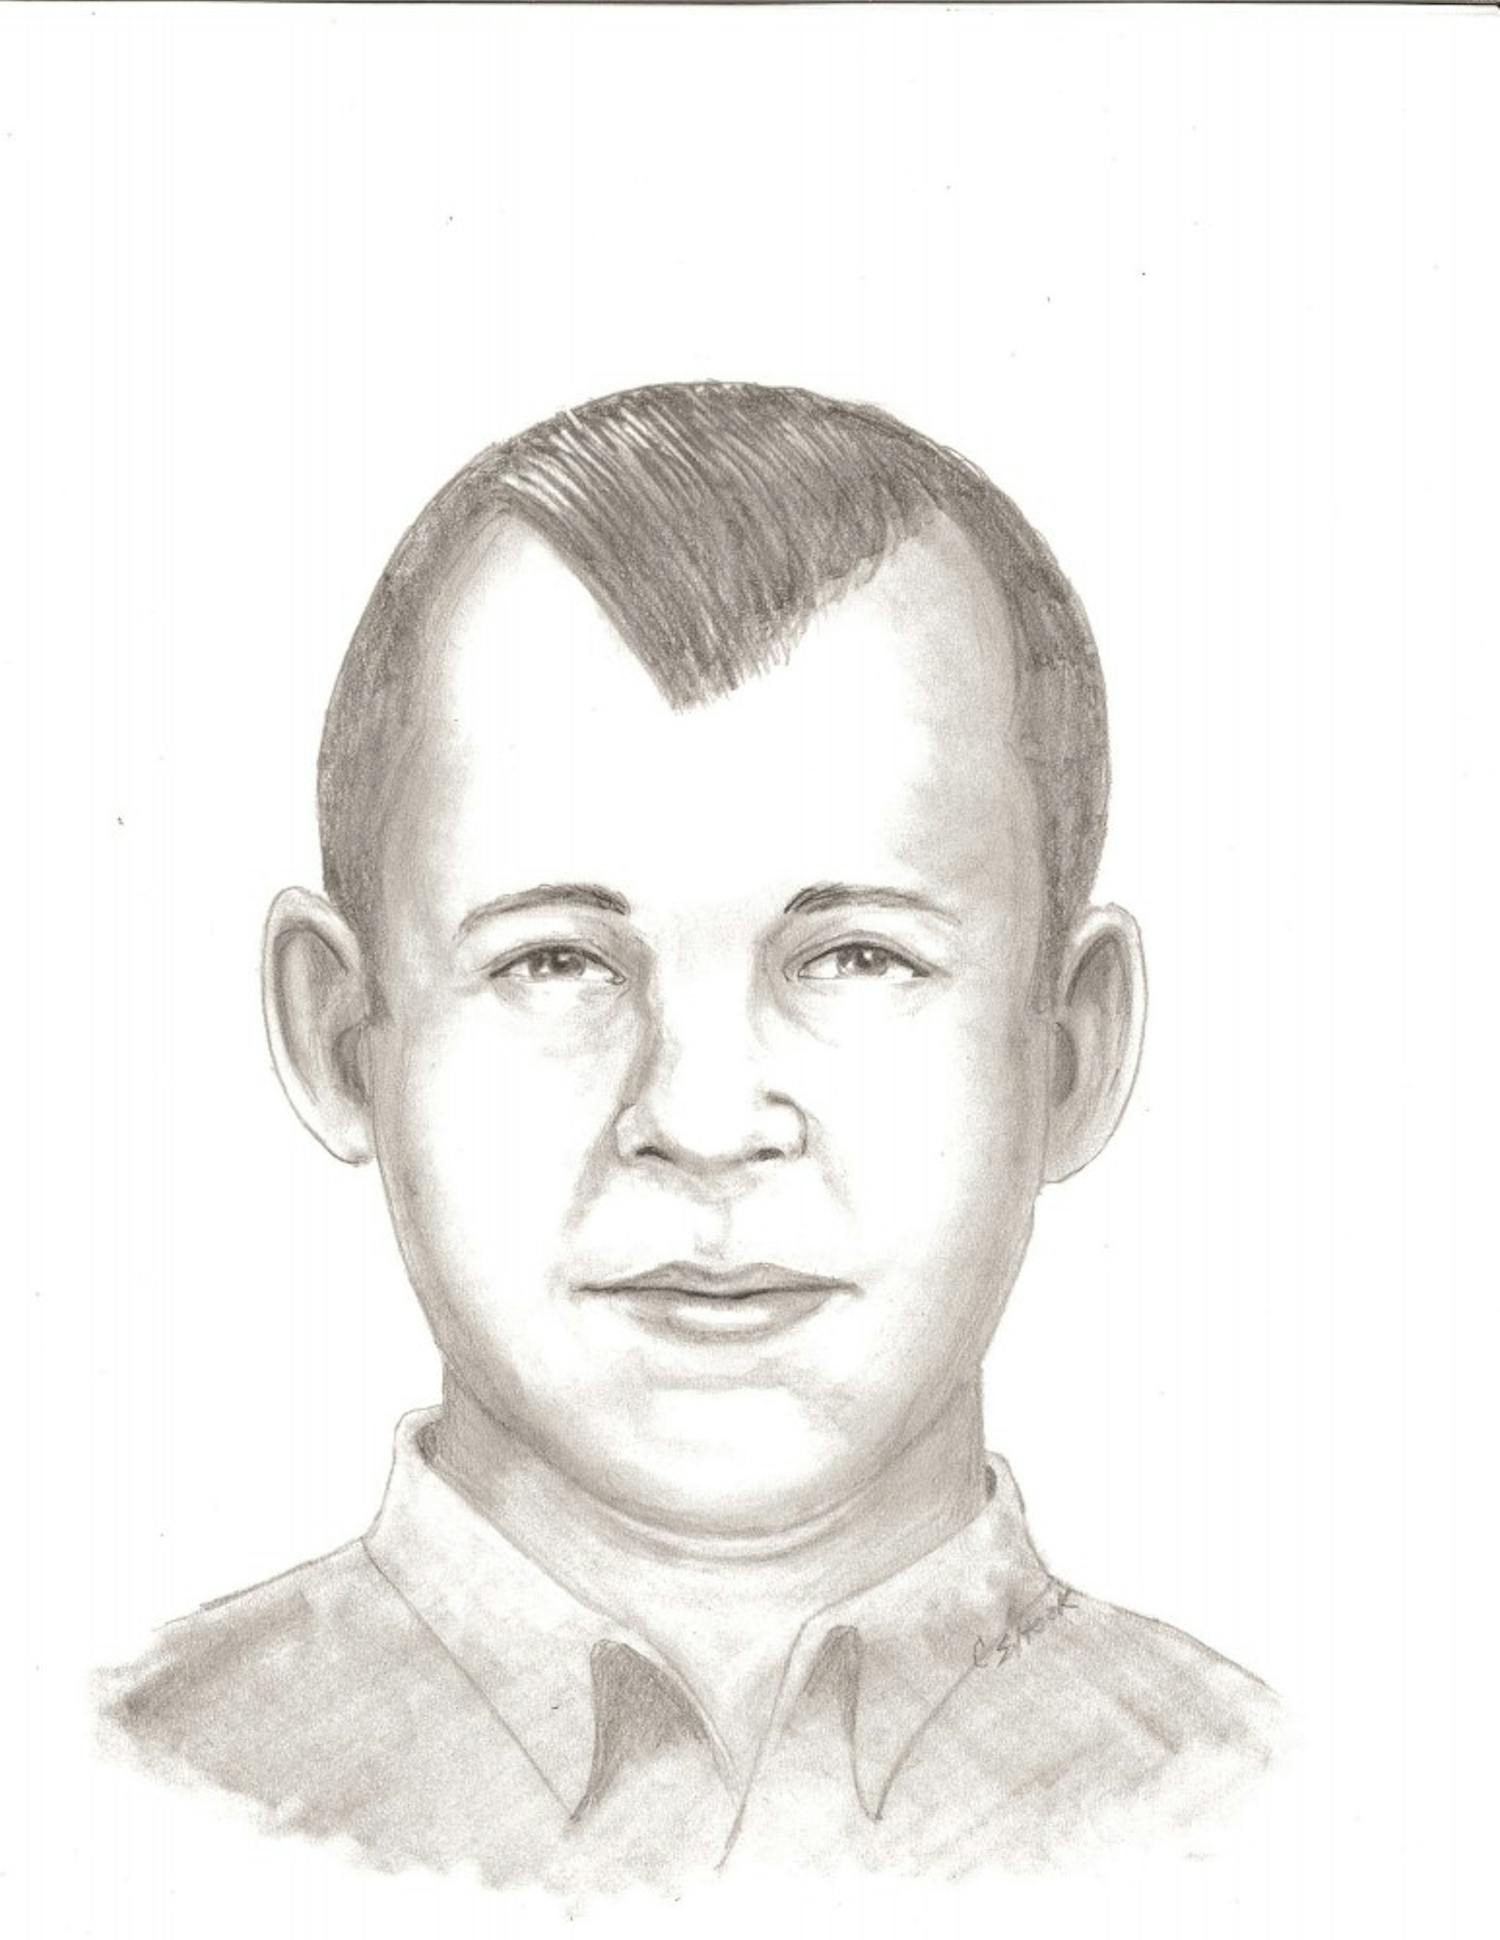 One of two sketches of the March 16, 2018, PNC Bank robbery suspect the Auburn Police Department released on March 26, 2018. This sketch is rendered with thicker lips.